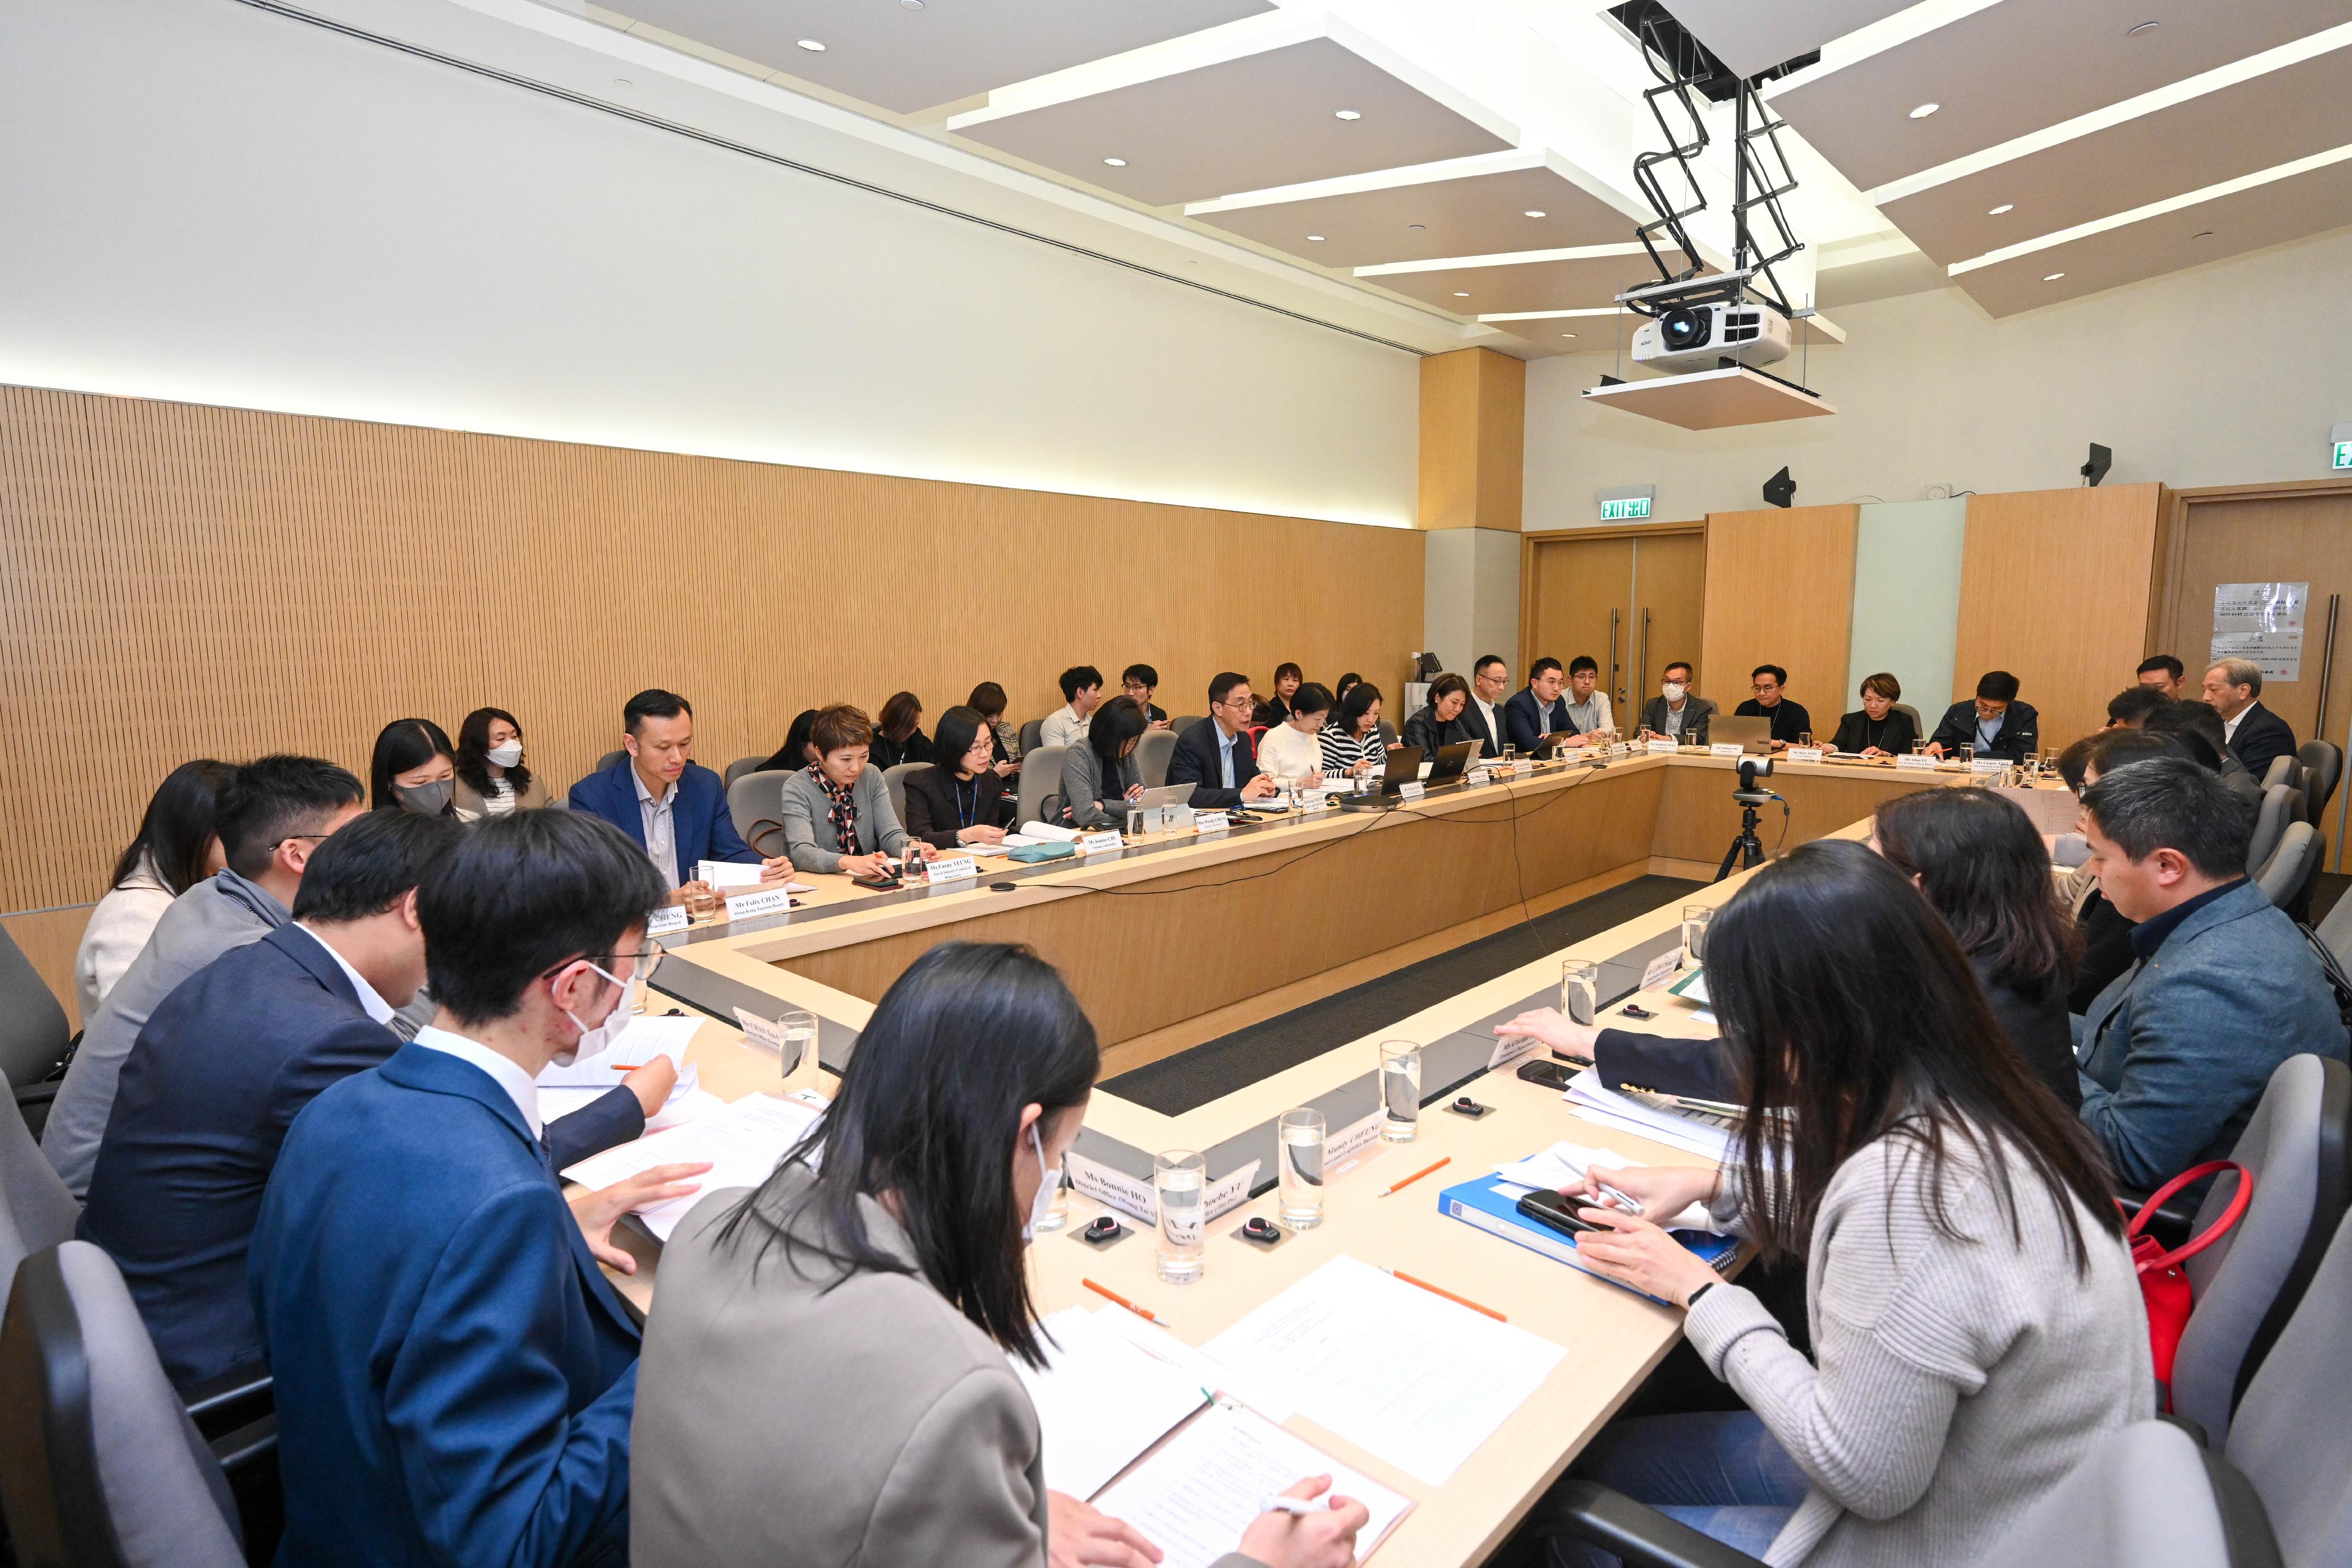 The Culture, Sports and Tourism Bureau convened a meeting today (January 15) to co-ordinate preparations for visitor arrivals to Hong Kong during the Chinese New Year Golden Week, and discussed with representatives of various units on the arrangements for the visitor arrivals.